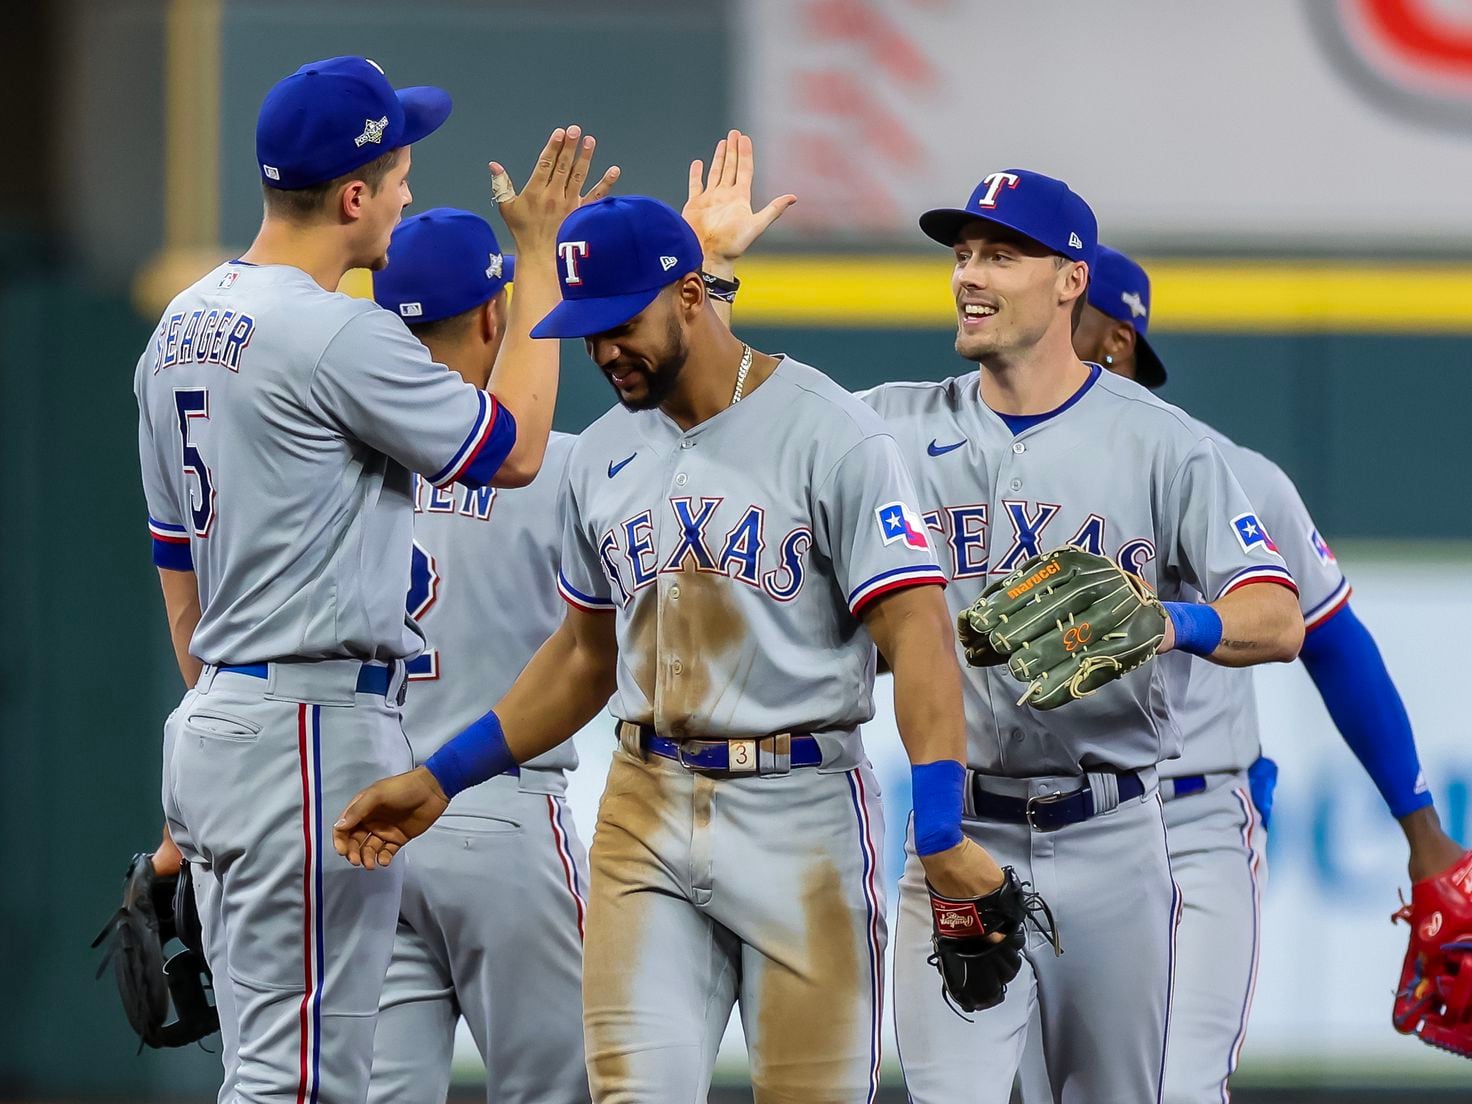 Rangers vs Astros Game 2 of the ALCS: reactions and takeaways - AS USA